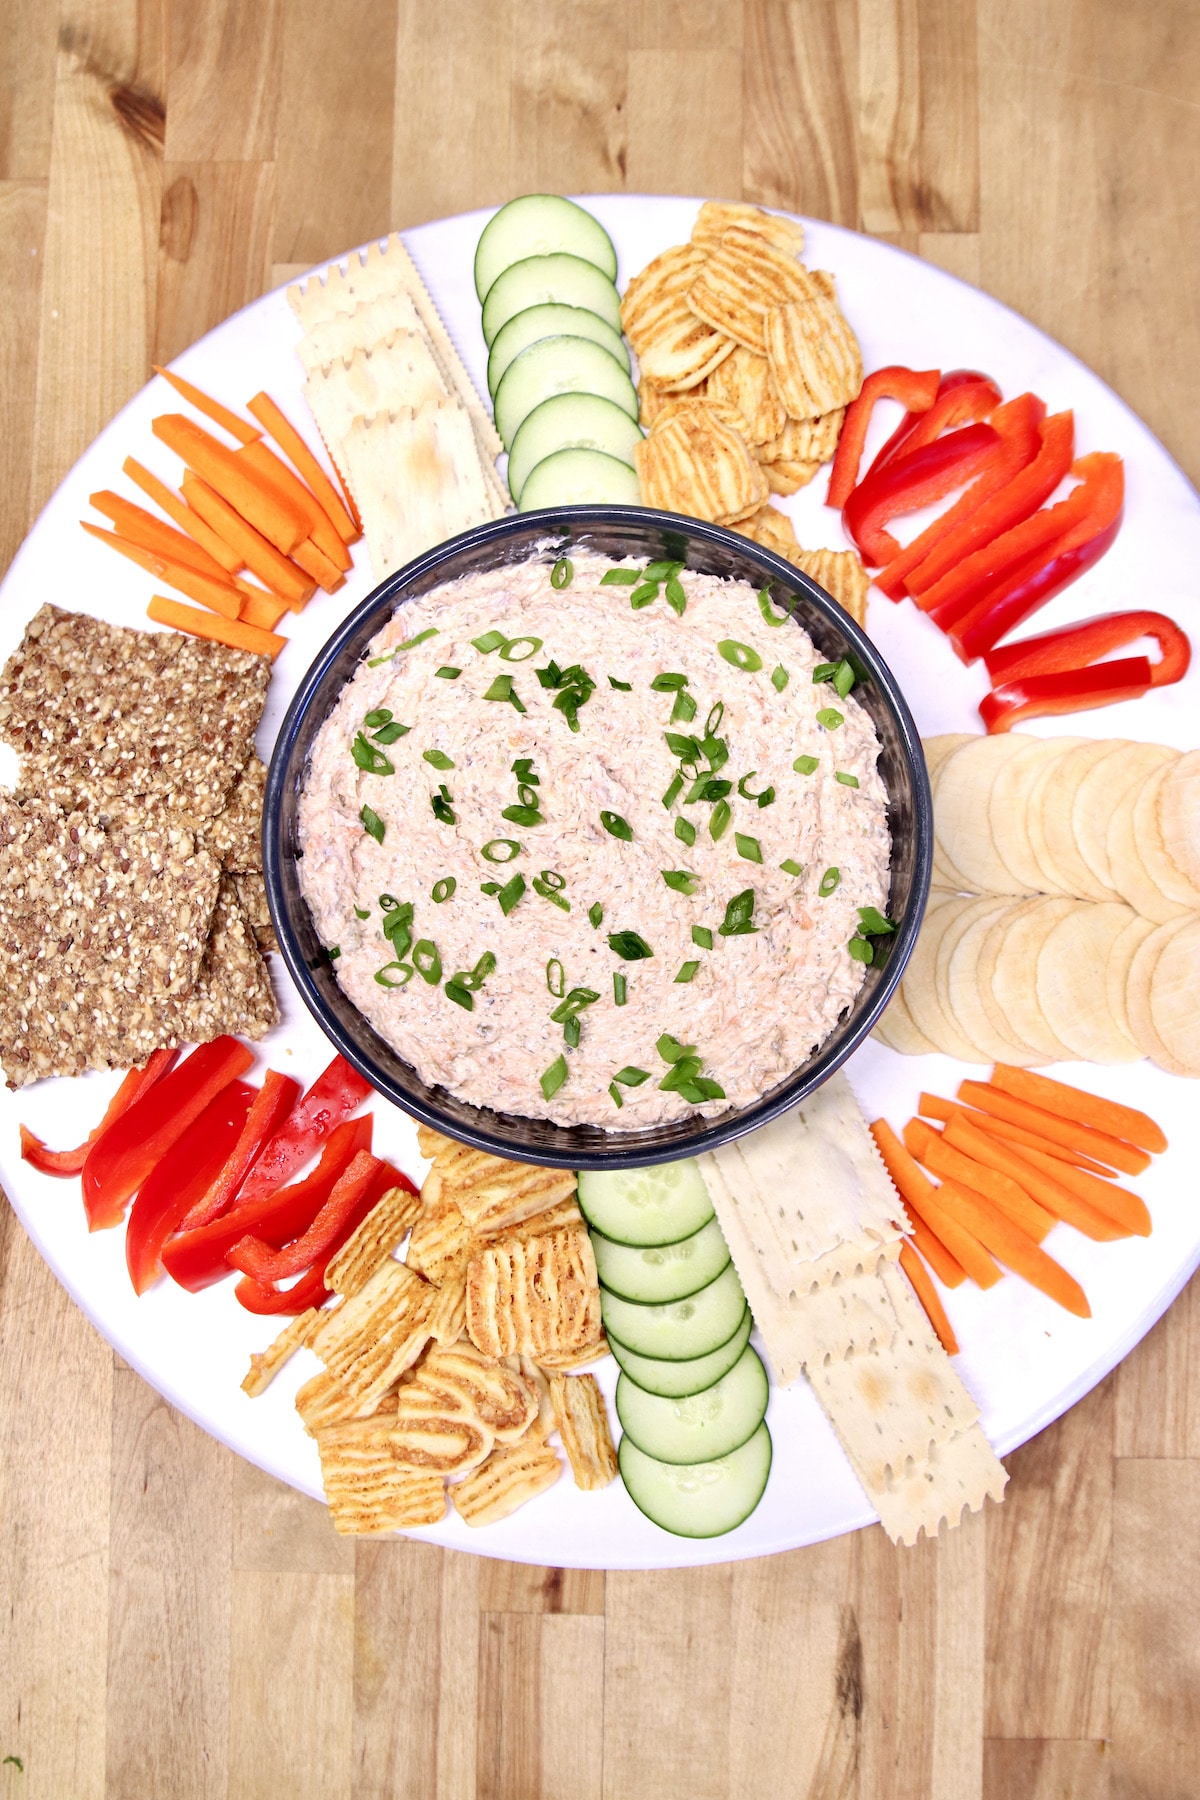 Platter of vegetables and crackers with salmon dip in center.